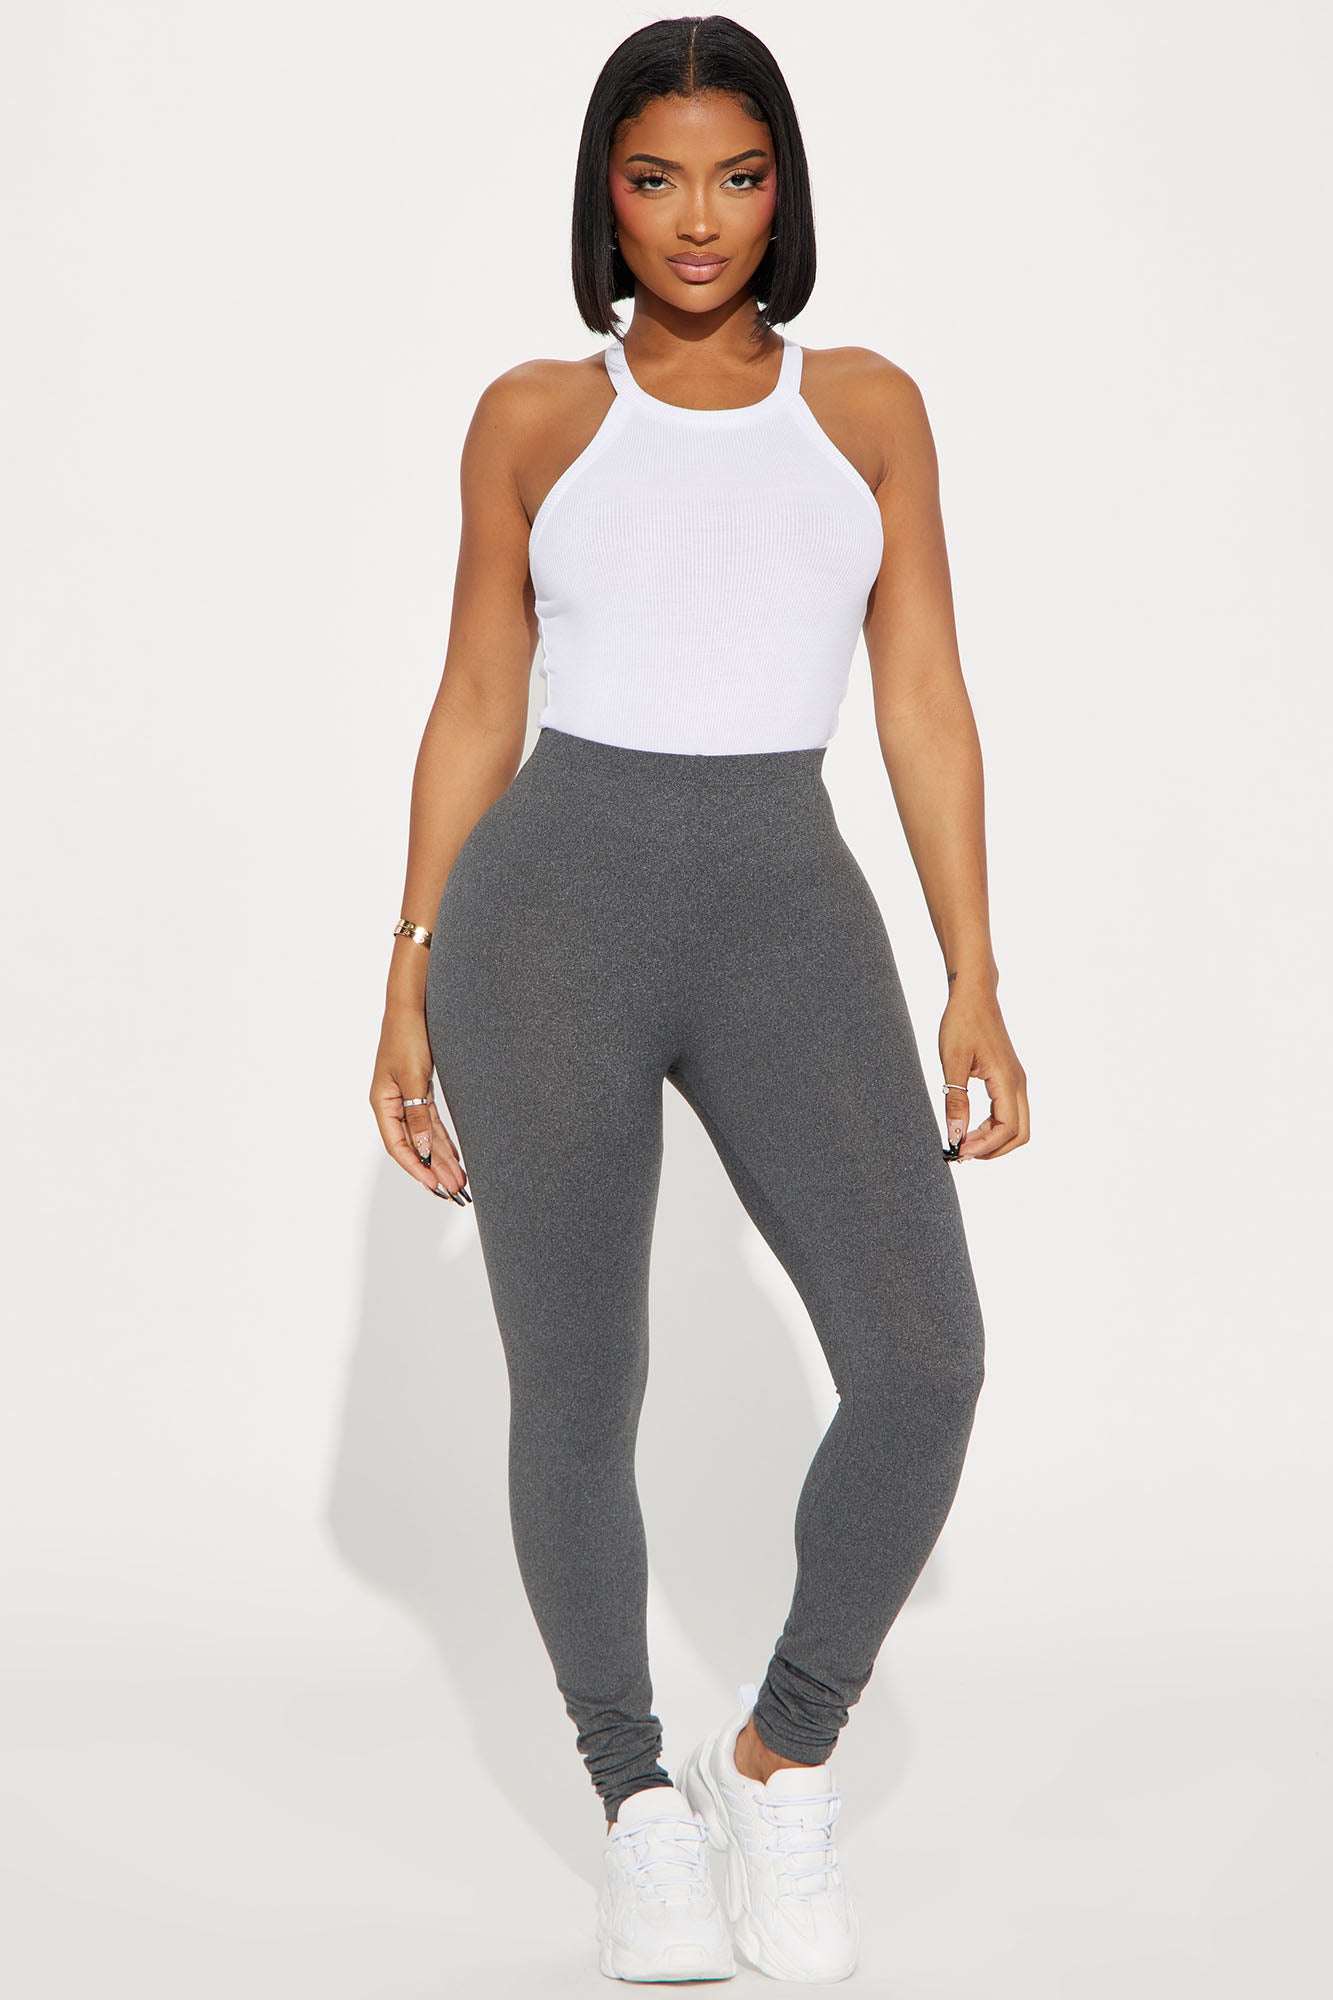 Almost Every Day Leggings - Charcoal